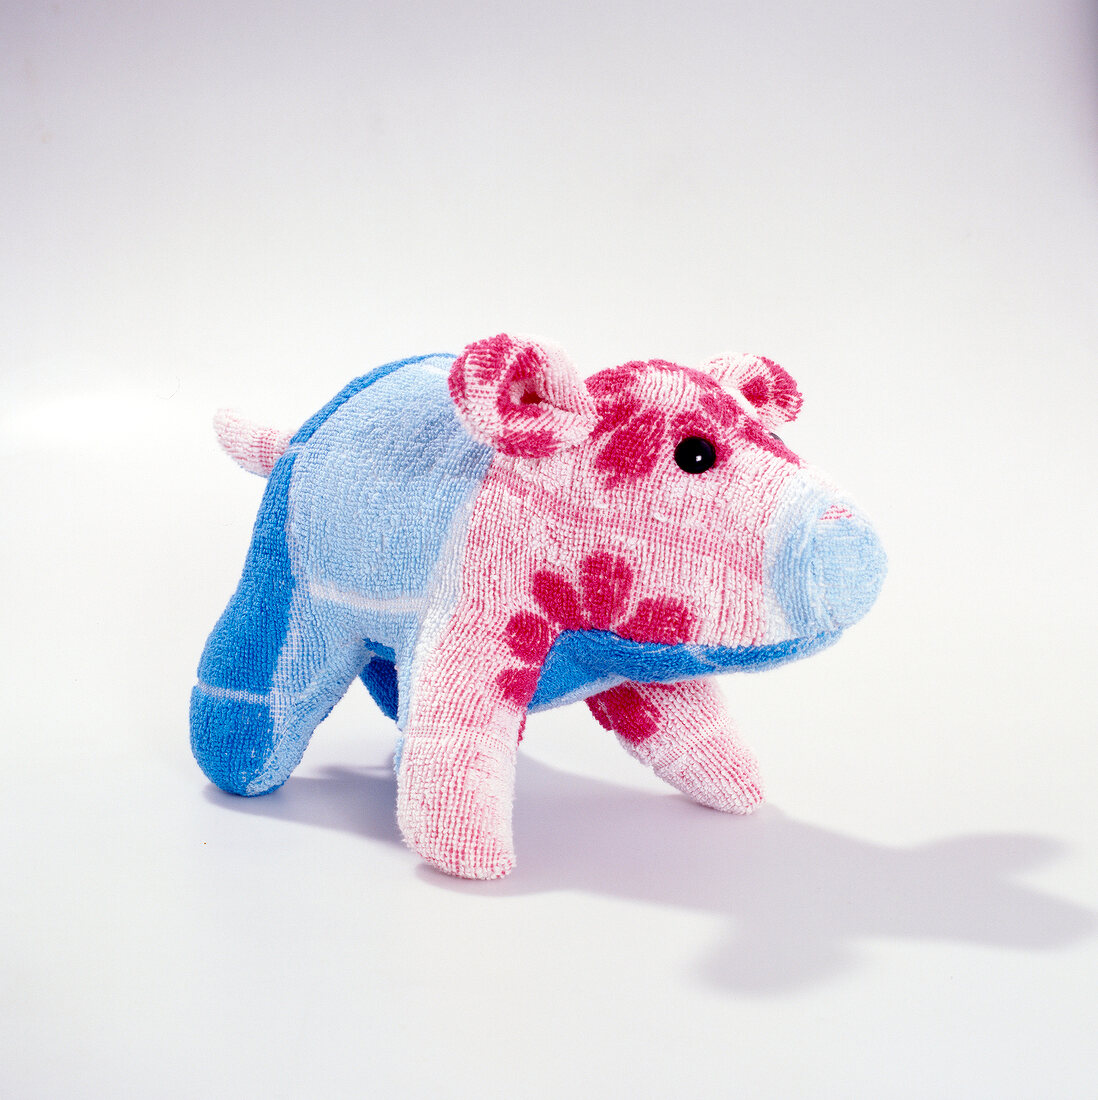 Close-up of pink and blue pig shaped stuffed figurine on white background